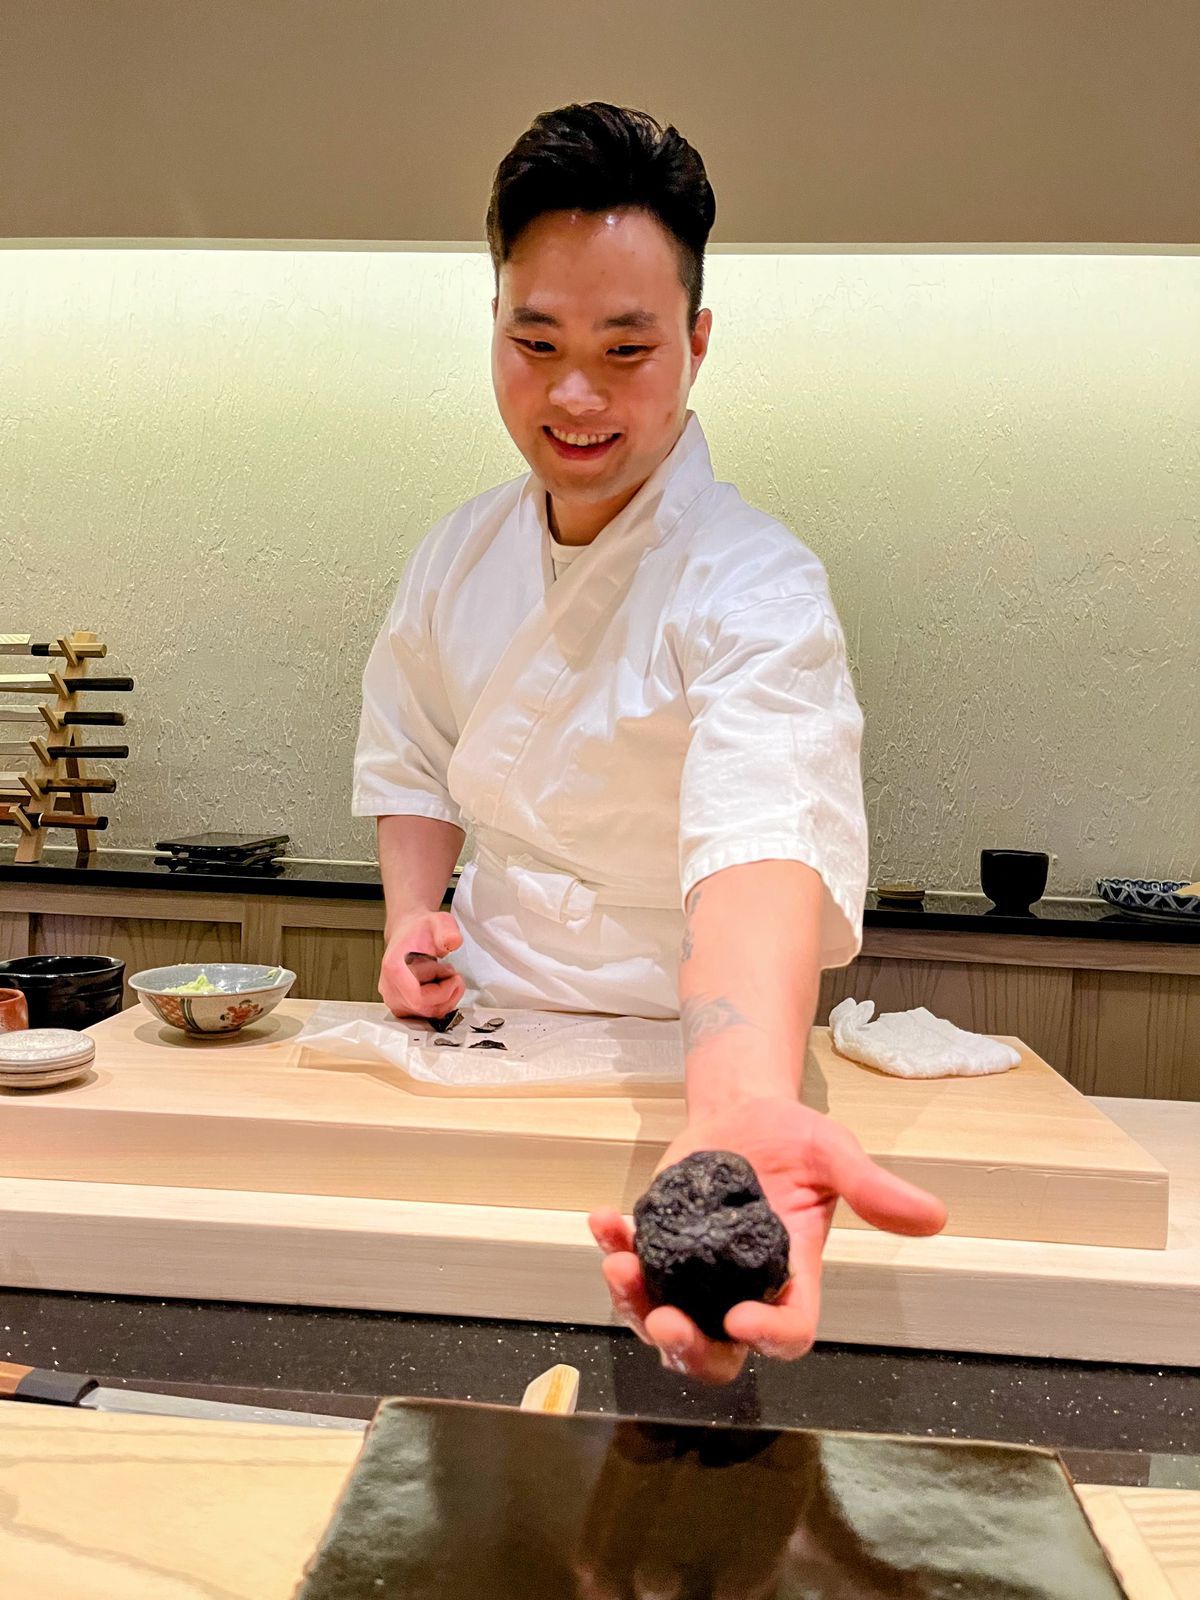 A man in a white chef’s coat stands behind a sushi counter with one hand extended, showing off a large black truffle.